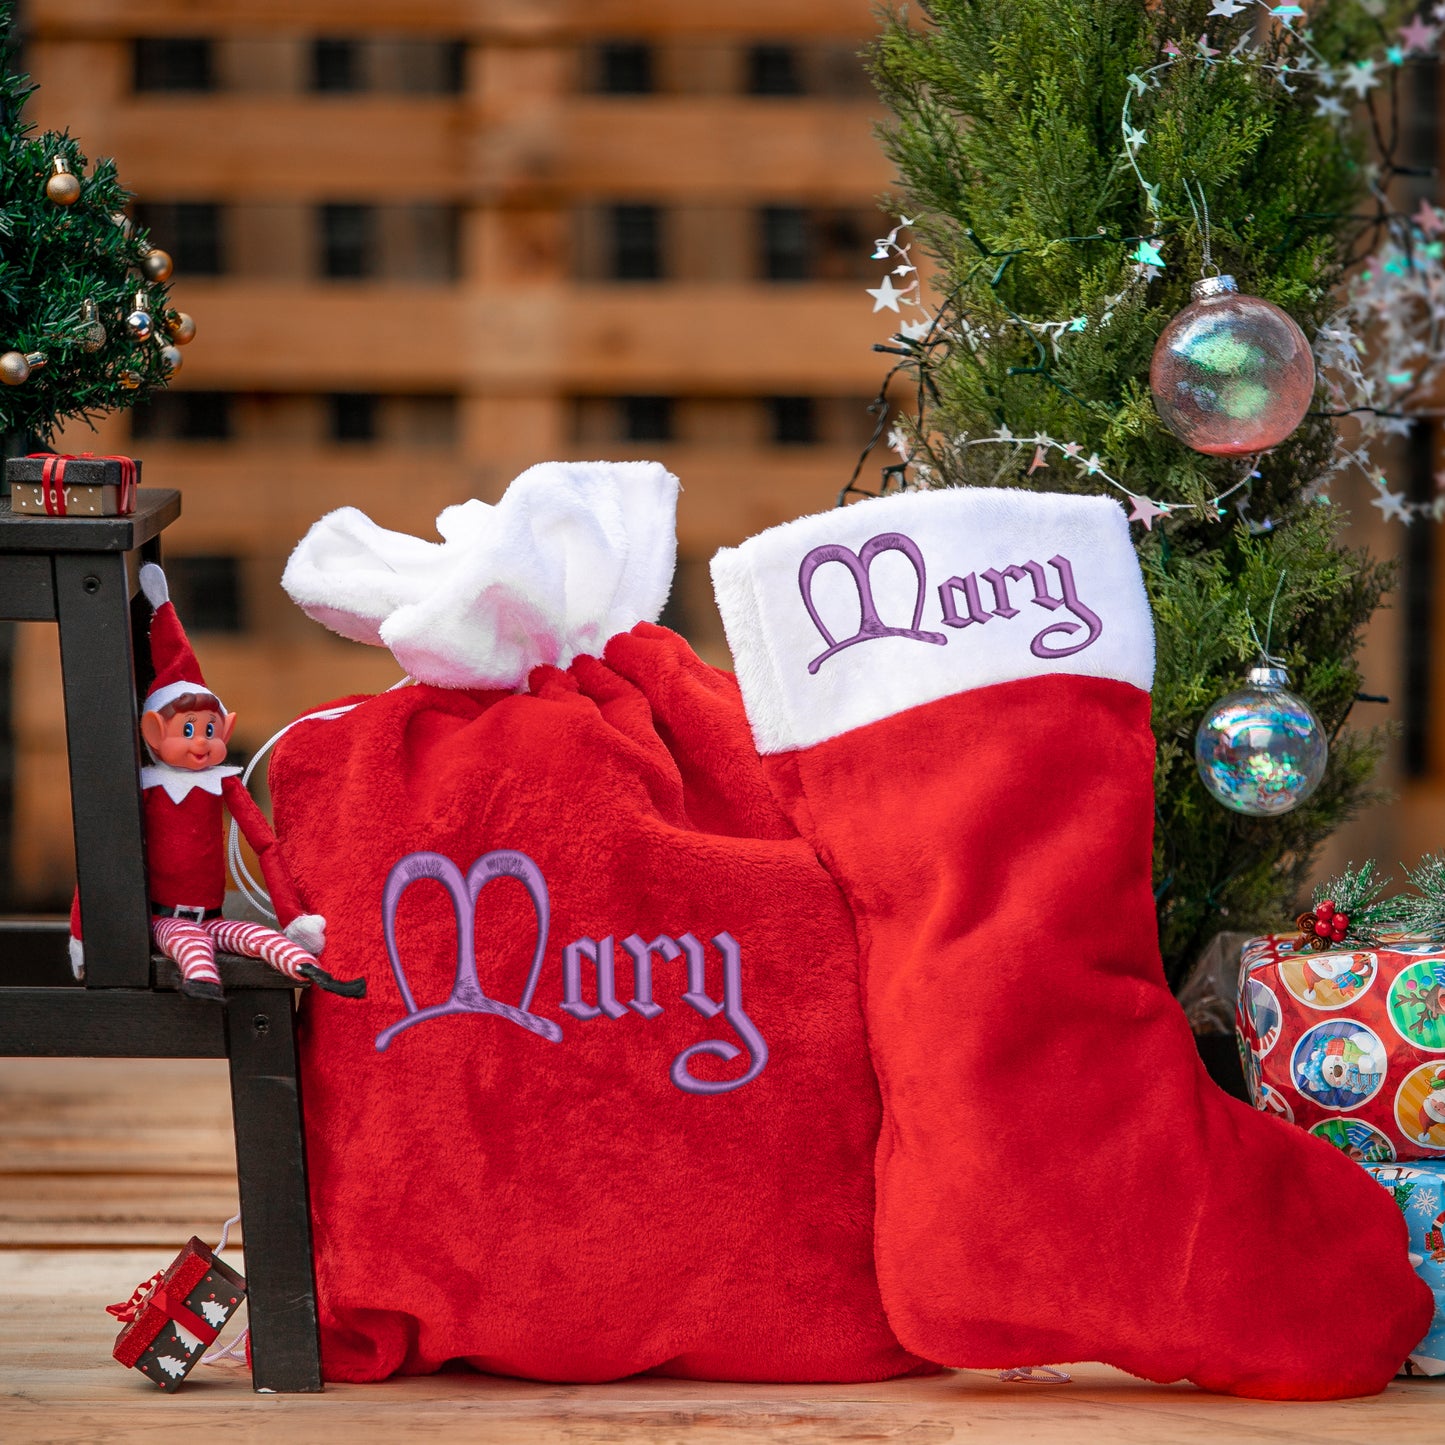 Personalised Christmas Plush Red Santa Sack and/or Stocking Embroidered Name Gift Set  - Always Looking Good -   